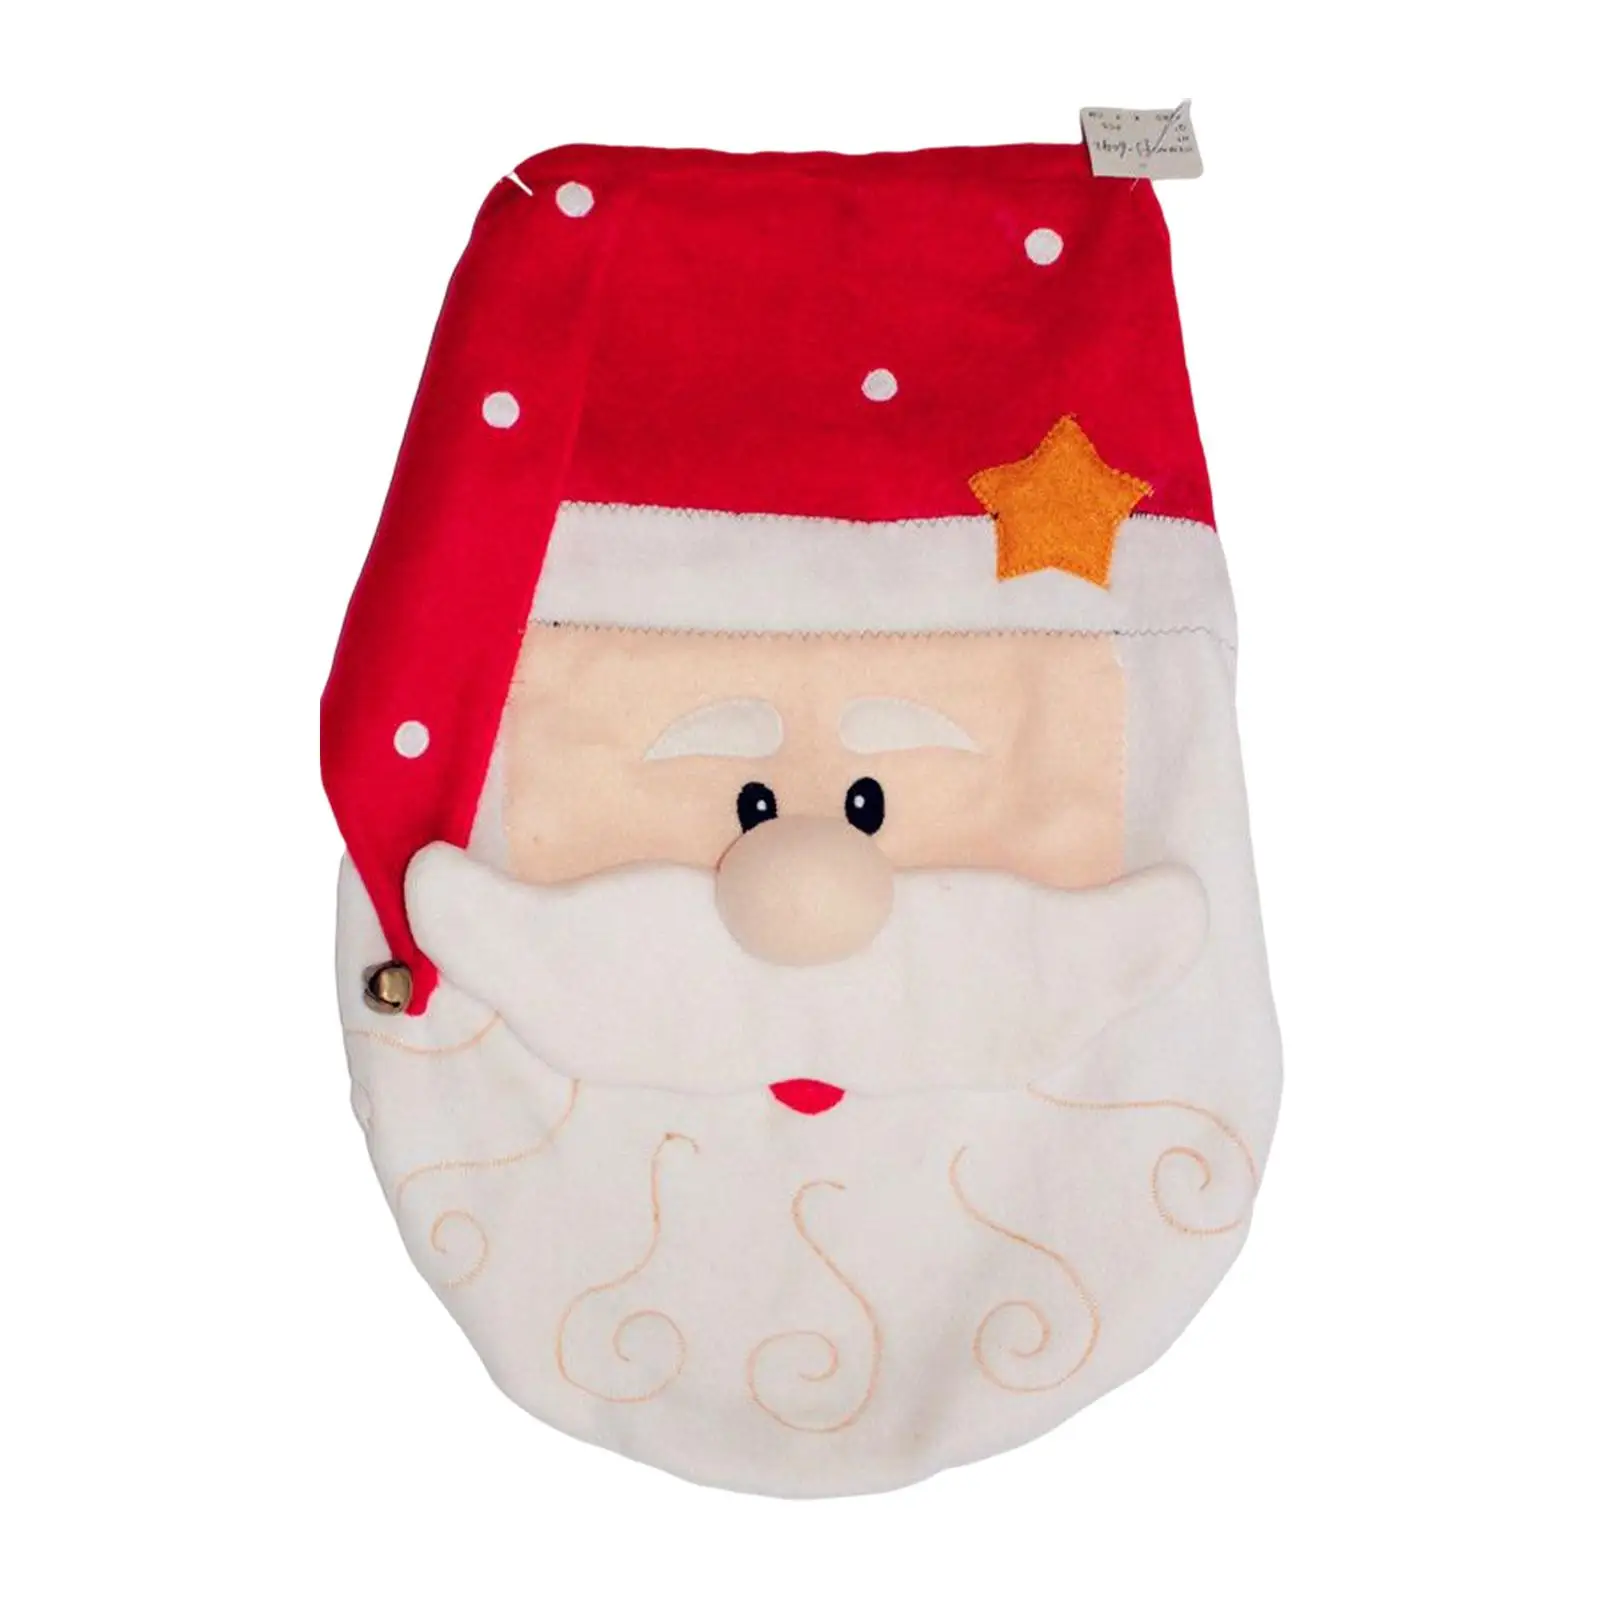 Fancy Toilet Seat Cover, Christmas, Red Mat, Ornament, Supplies, Lid Cover, for